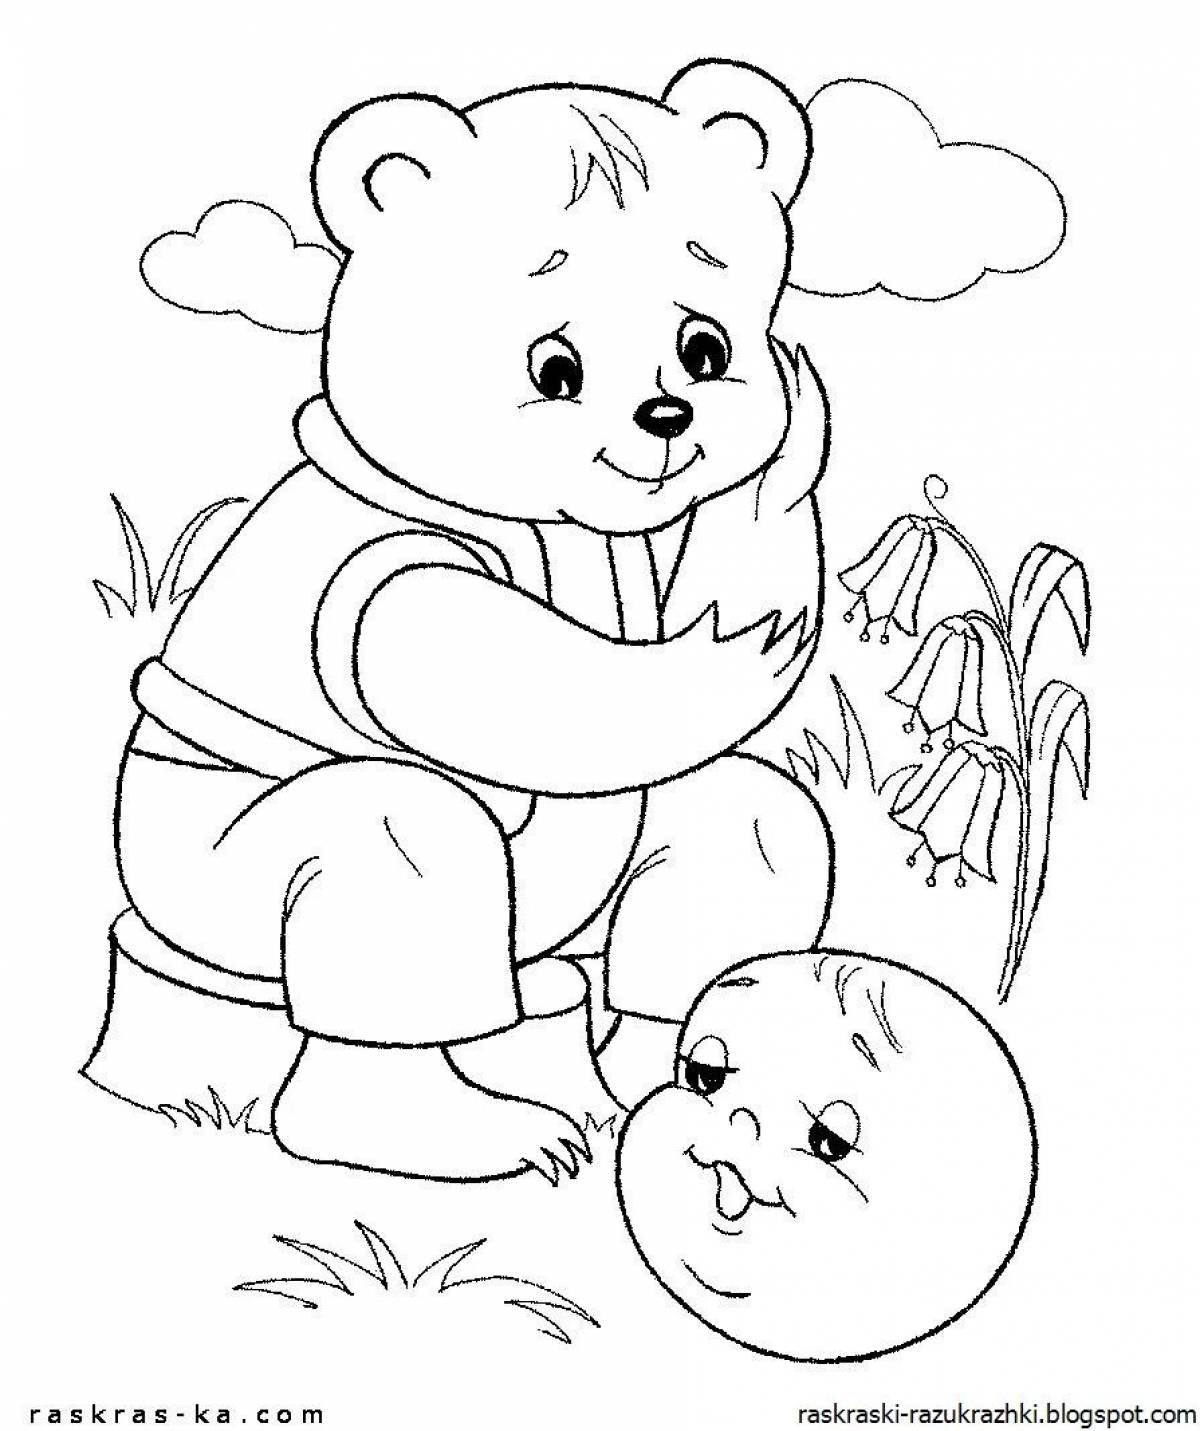 Mysterious coloring pages heroes of fairy tales